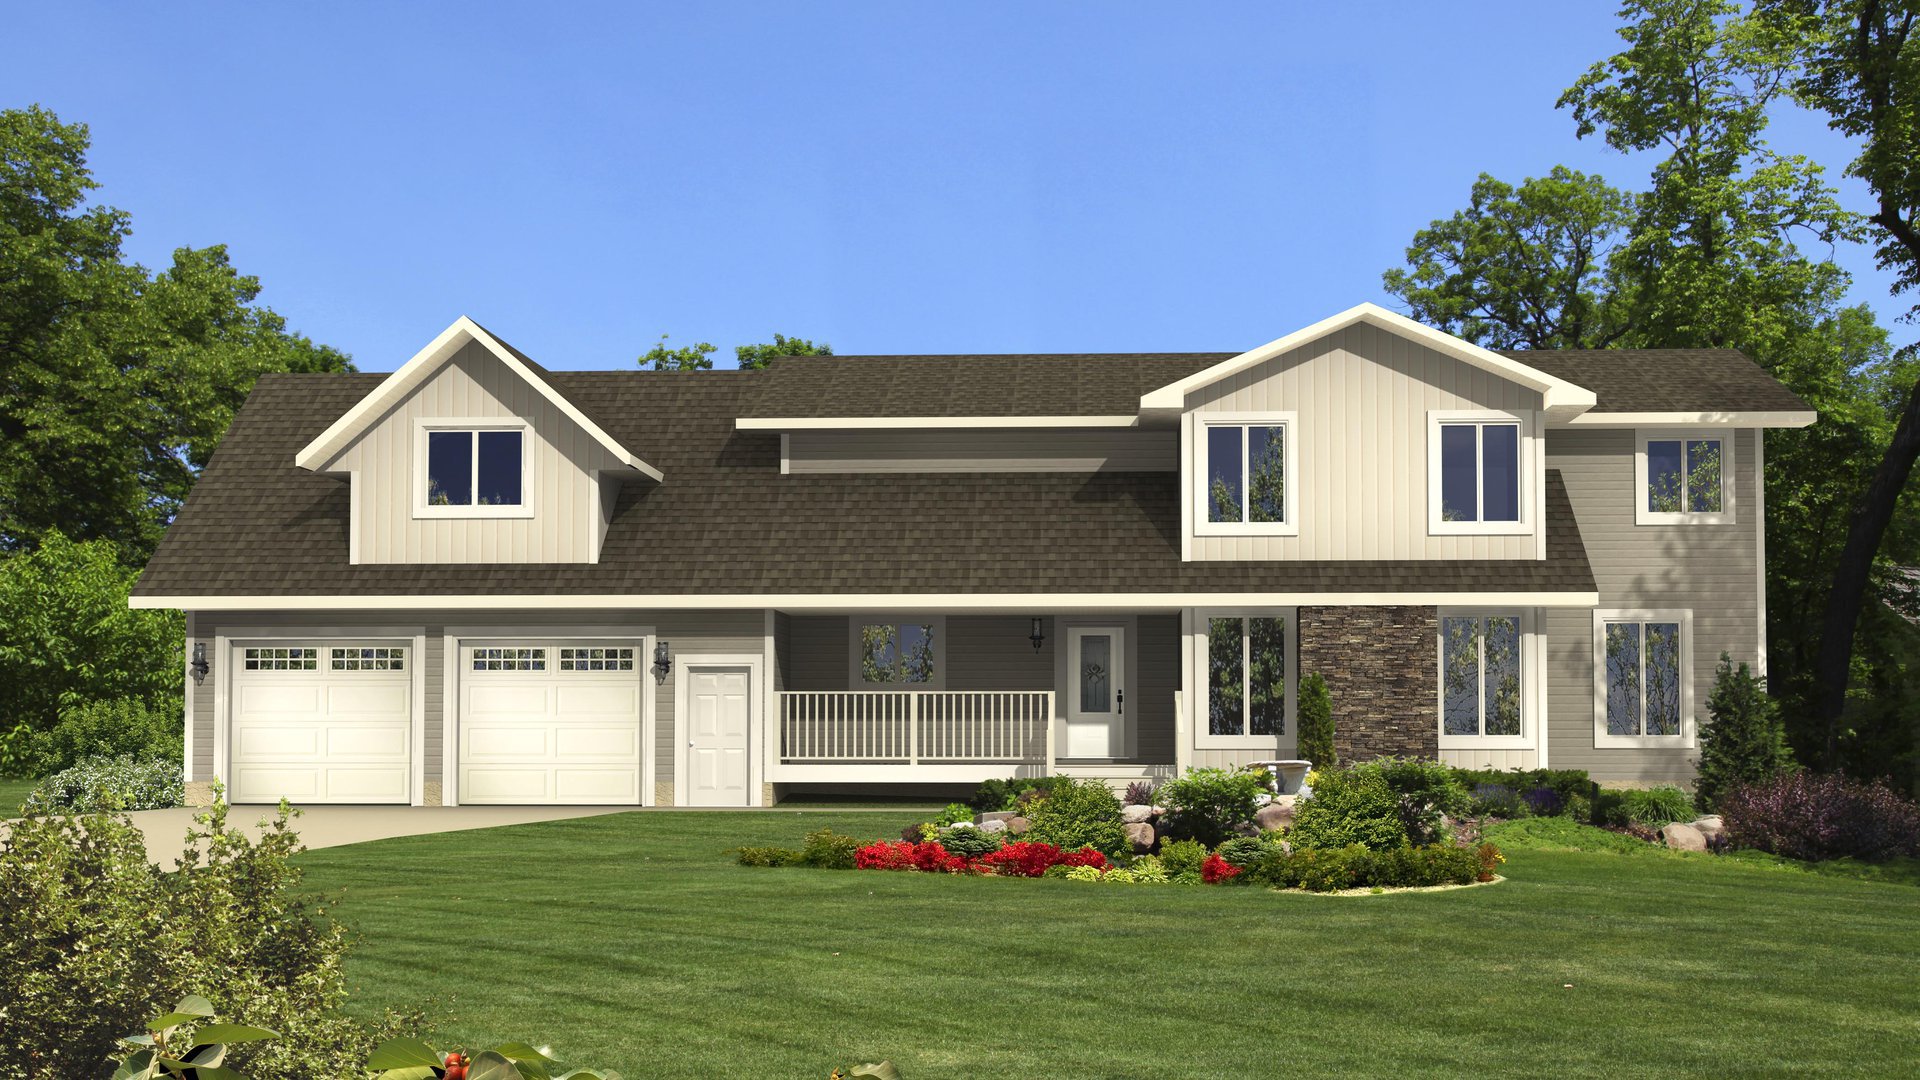 Peyton house plan modular homes nelson homes ready to move prefabricated home packages.jpg